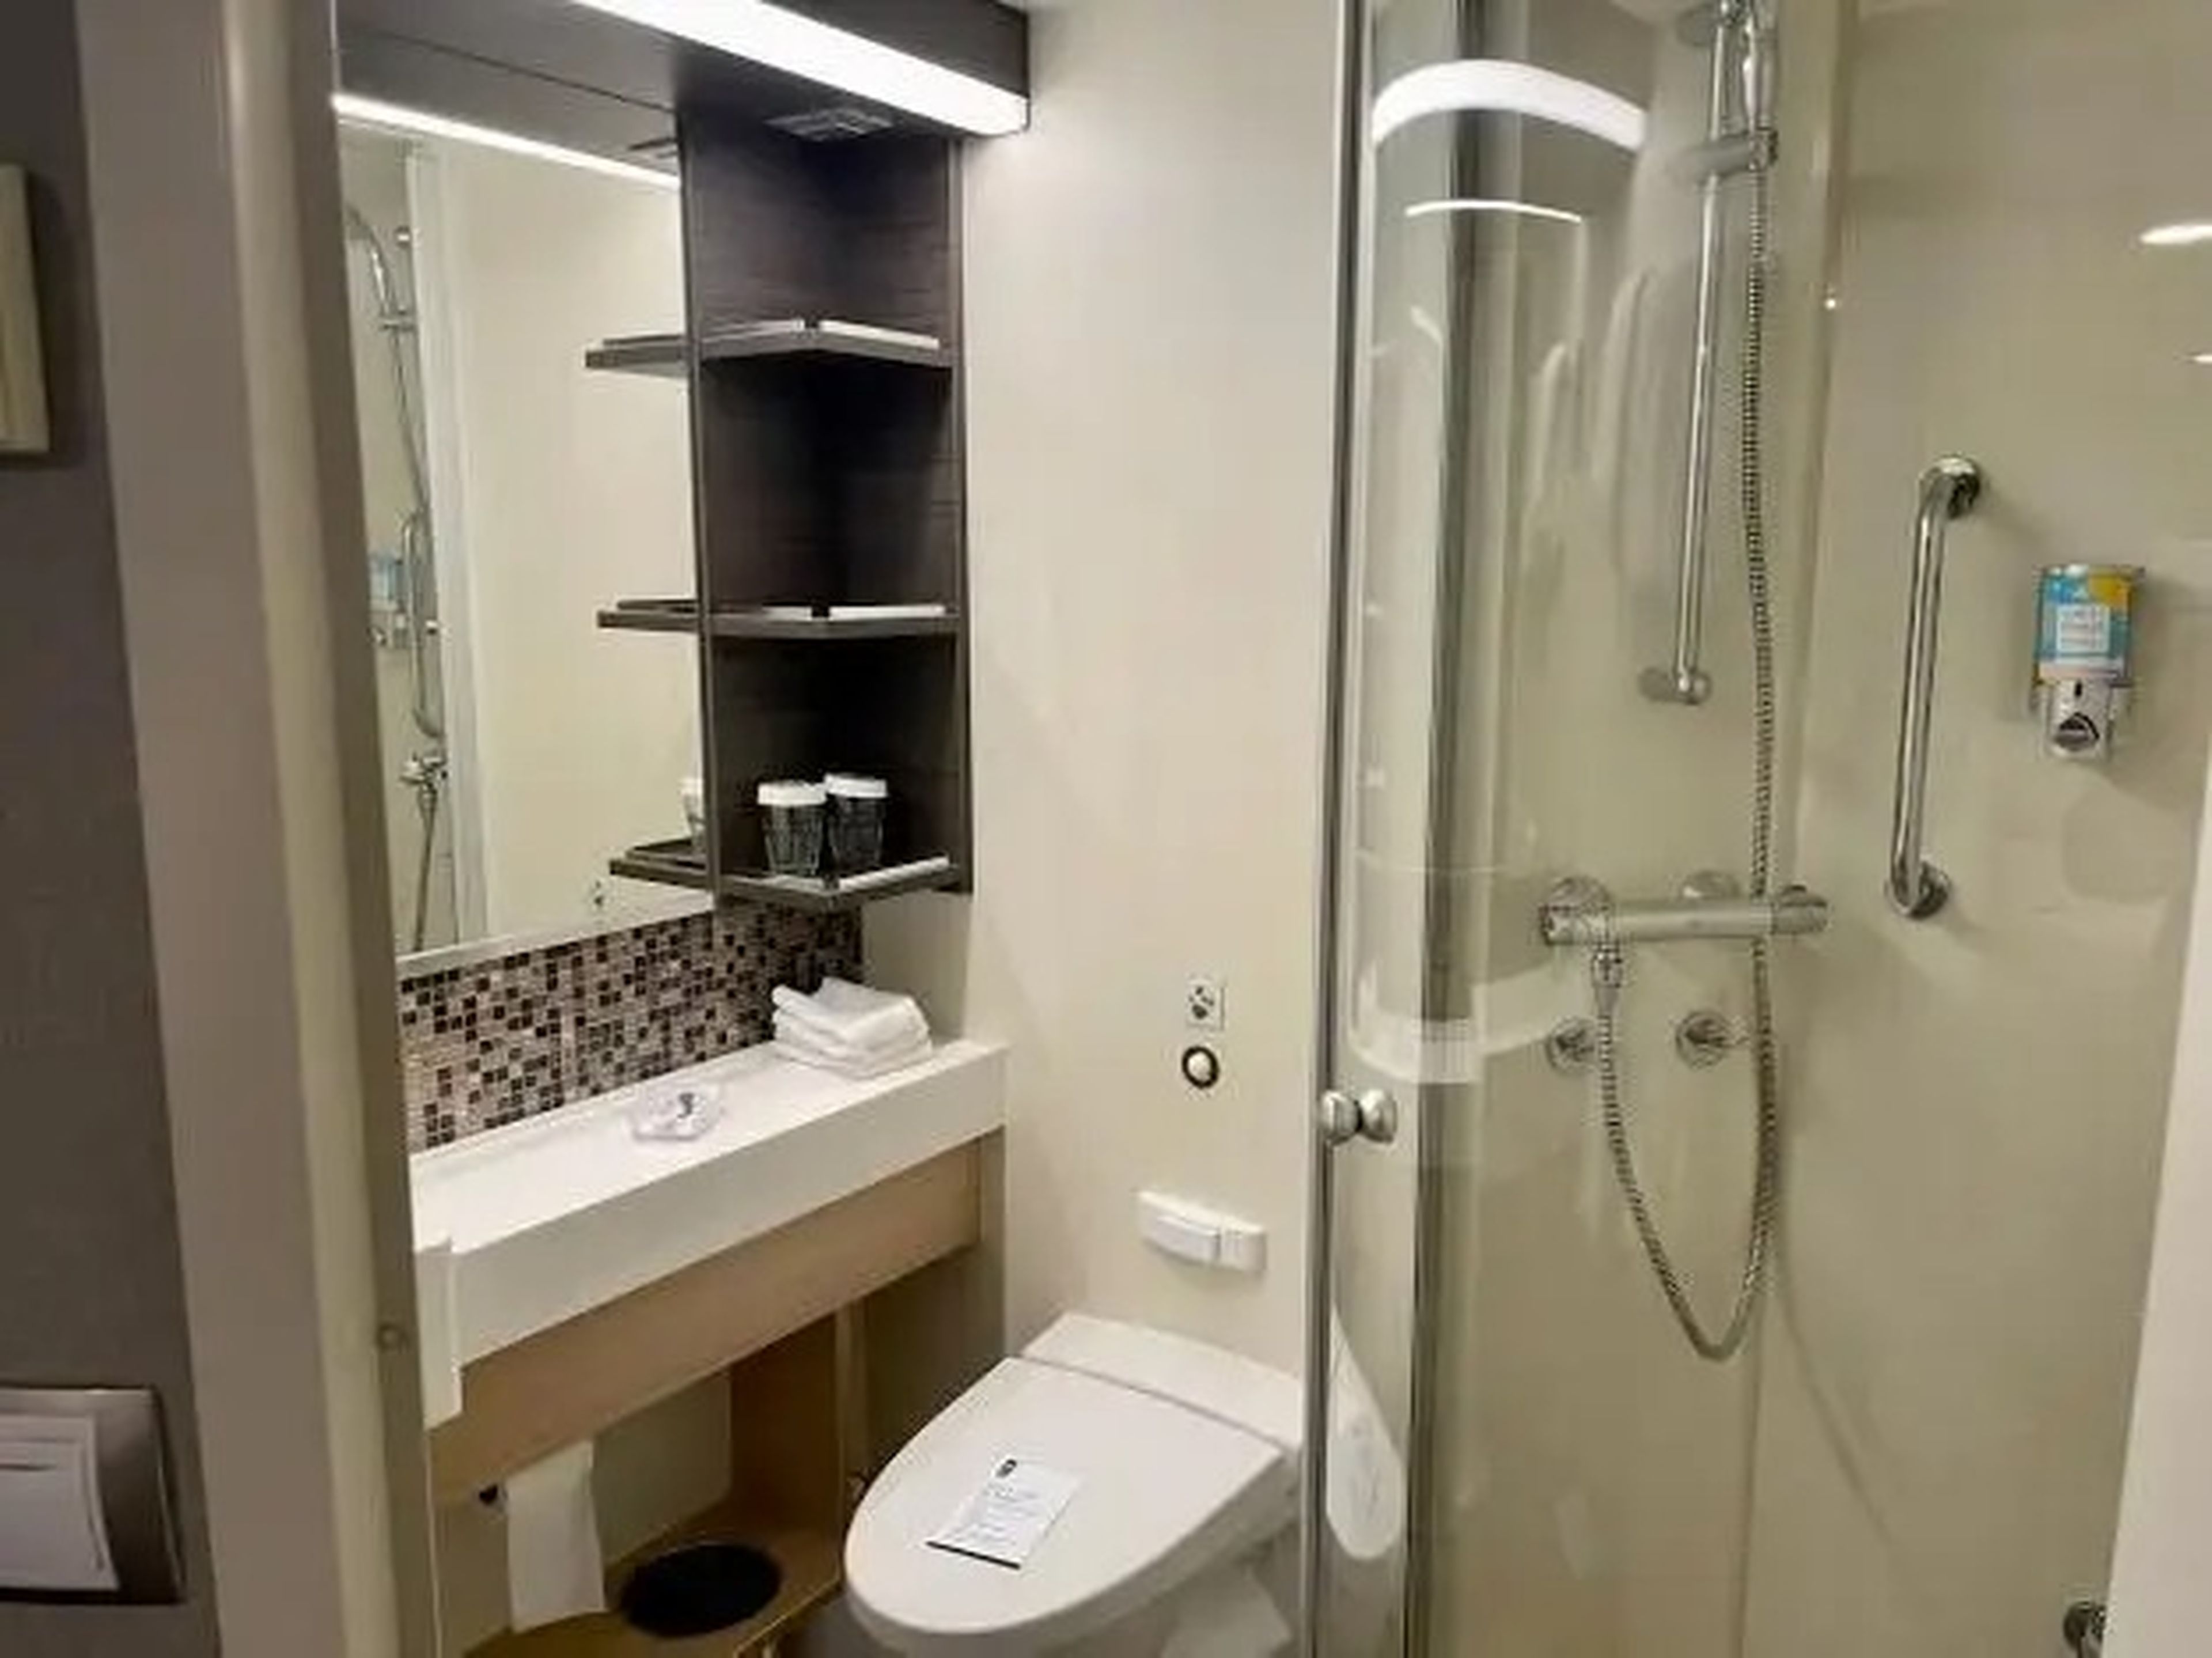 bathroom of interior carbin on symphony of the seas, view of sink, toilet, shower